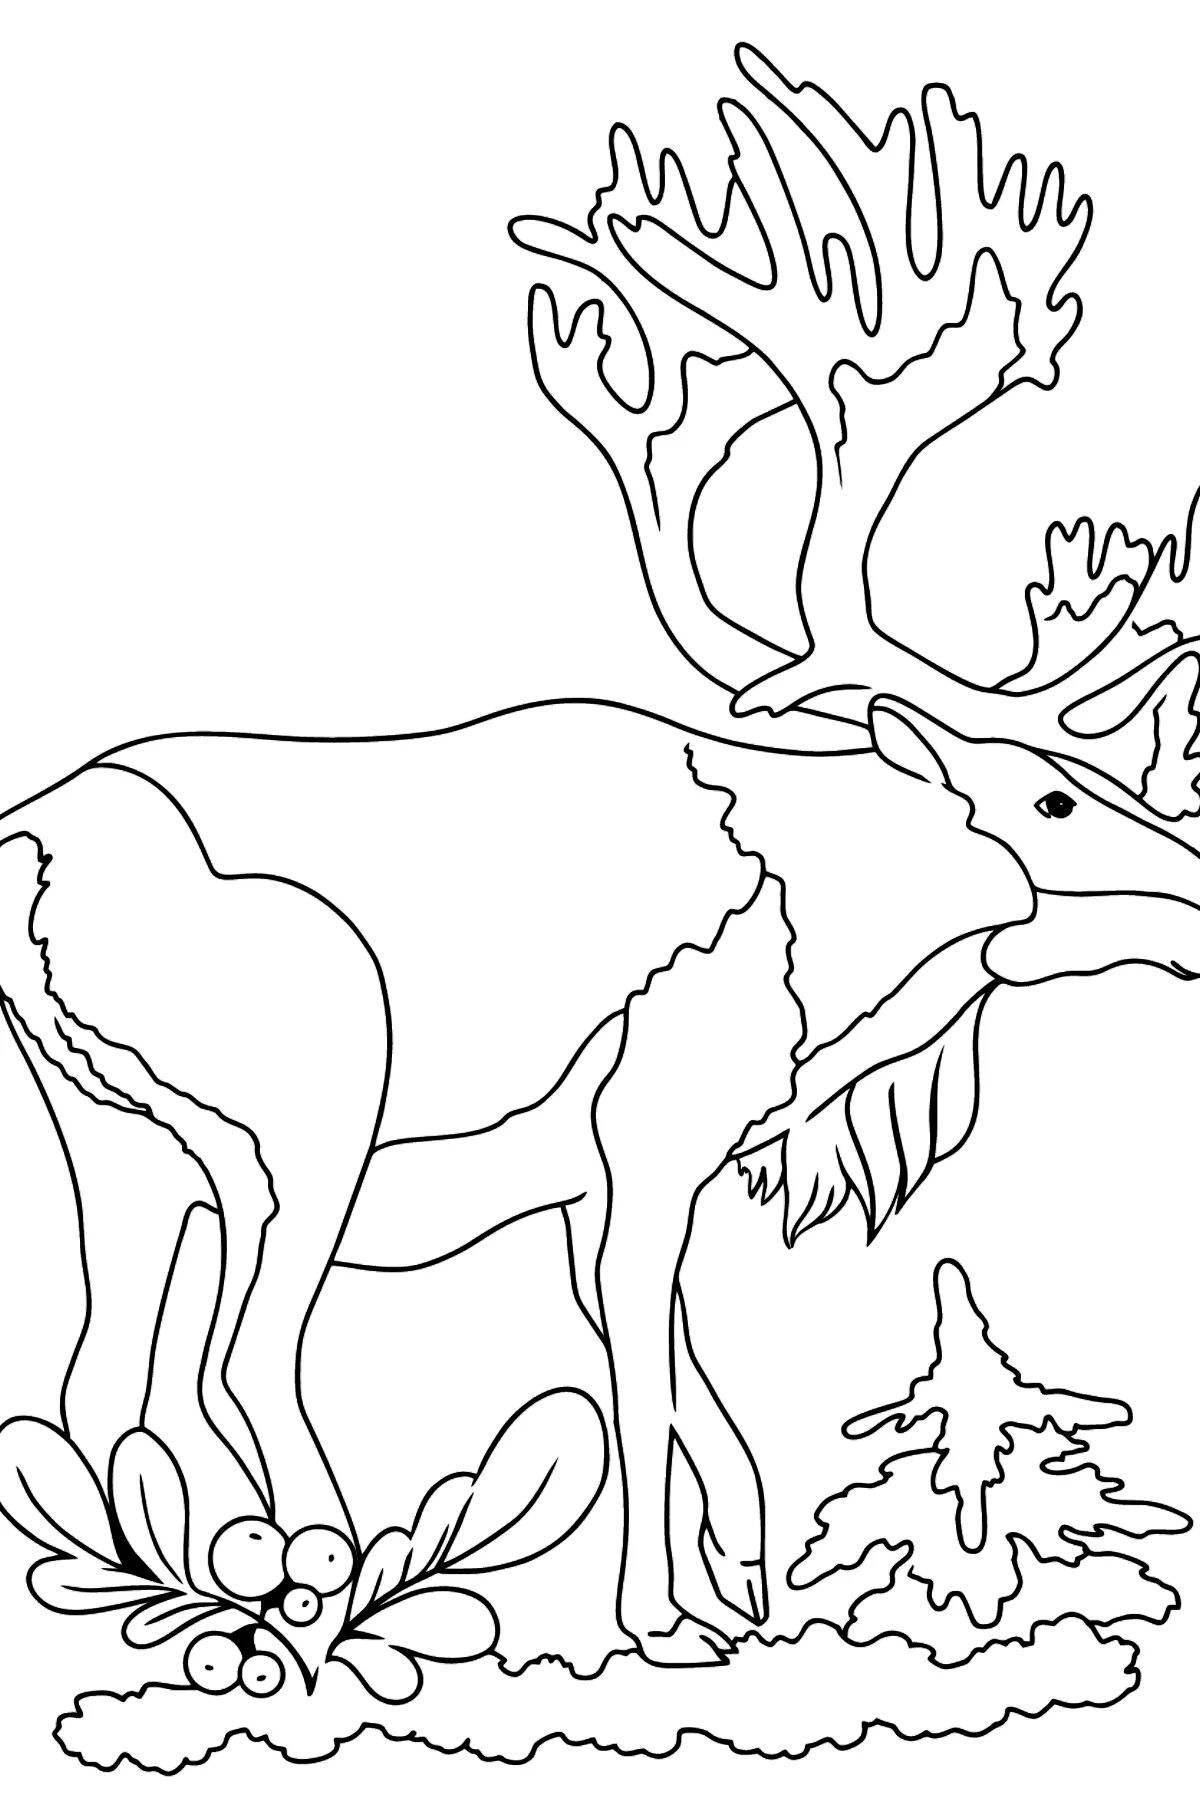 Playful deer coloring book for 3-4 year olds